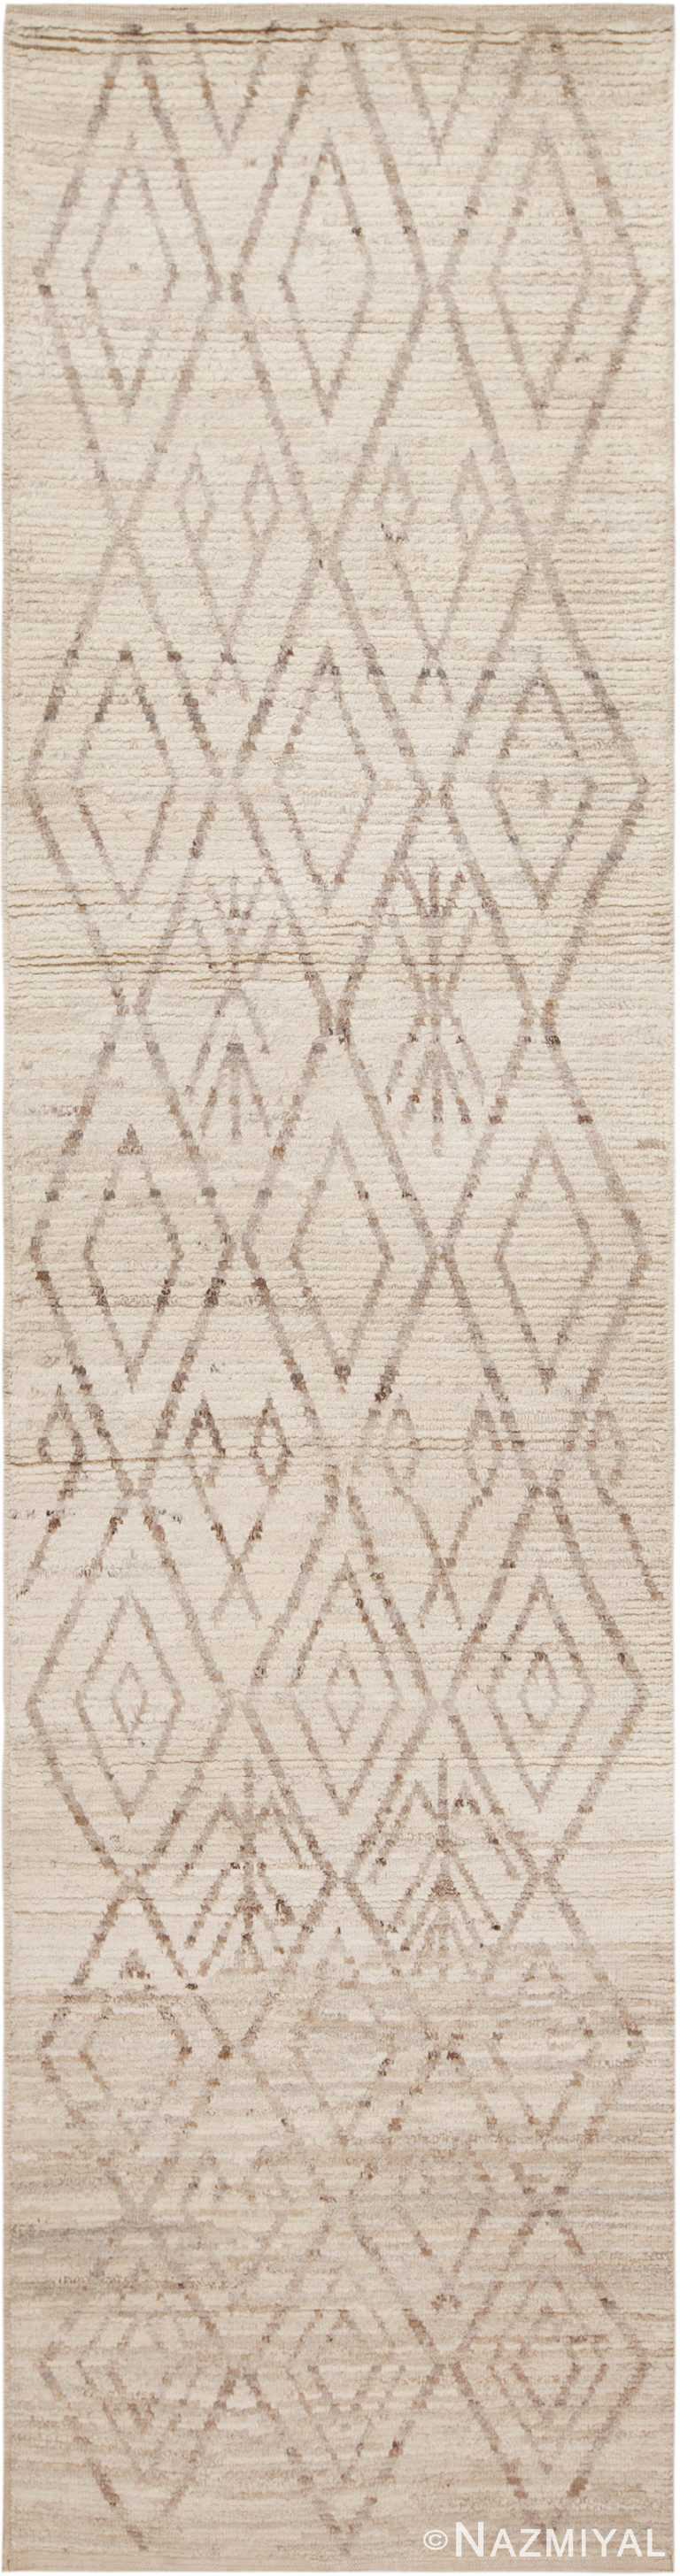 Tribal Beni Ourain Design Modern Contemporary Runner Rug 11160 by Nazmiyal Antique Rugs